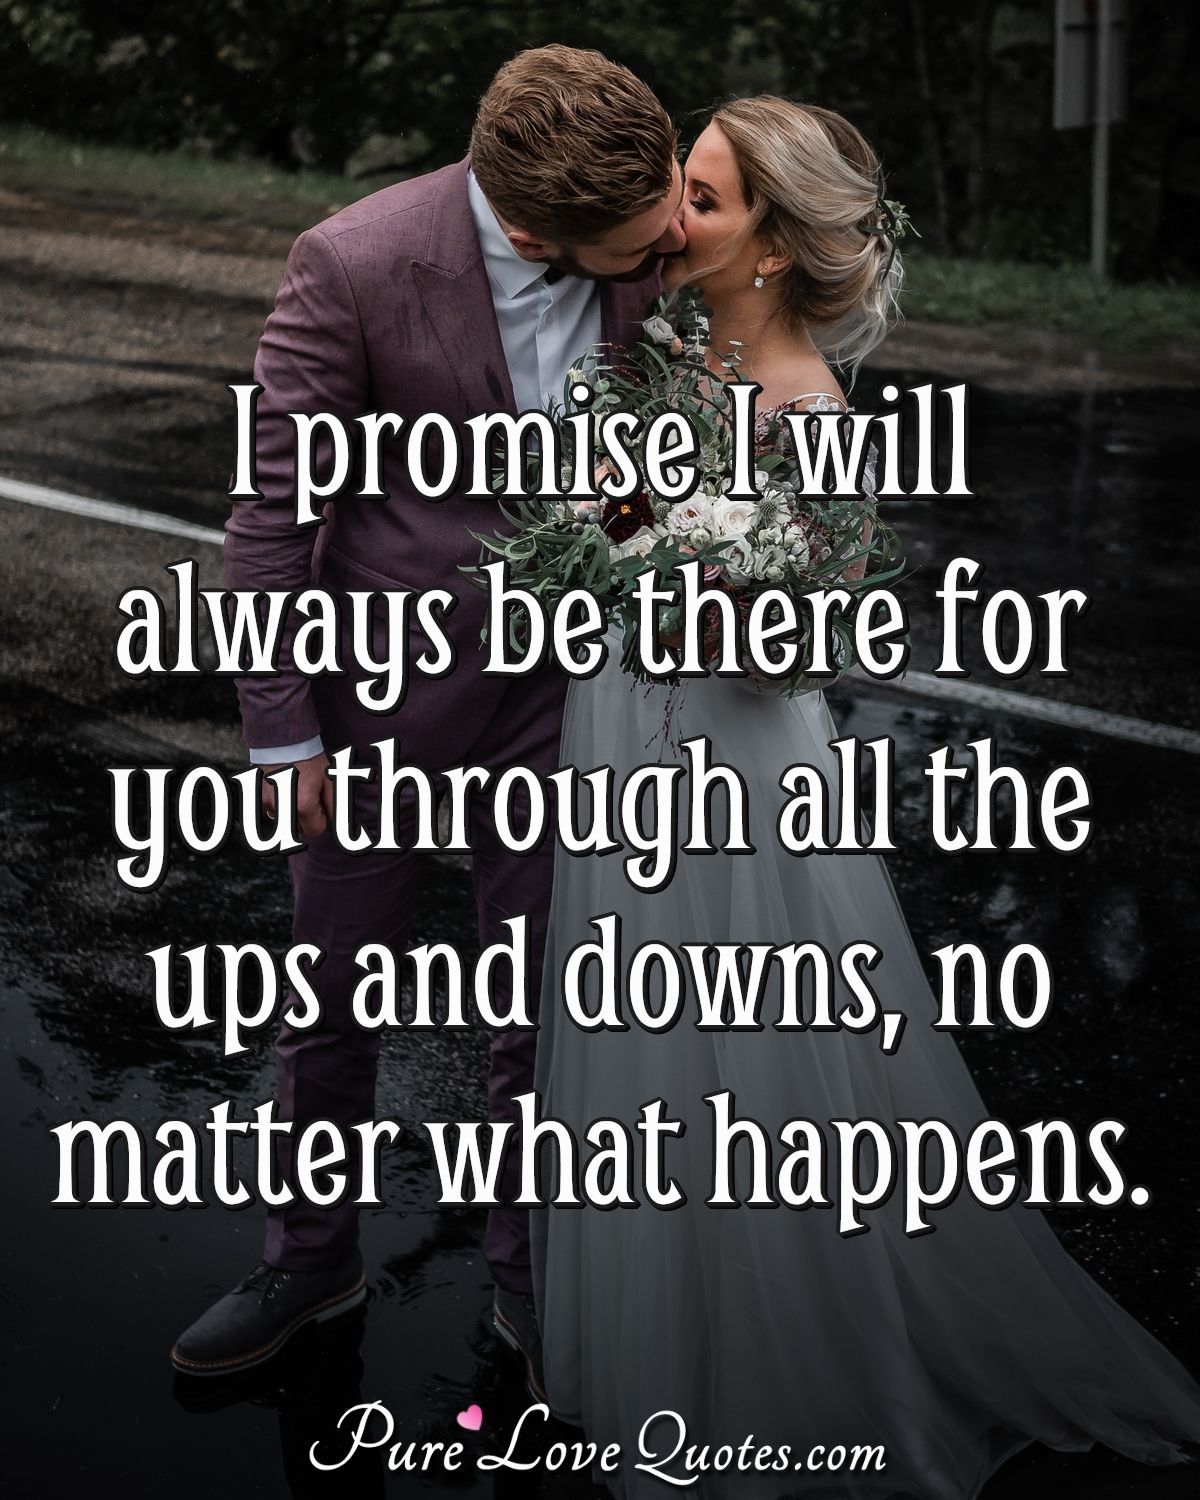 I Promise I Will Always Be There For You Through All The Ups And Downs, No... | Purelovequotes